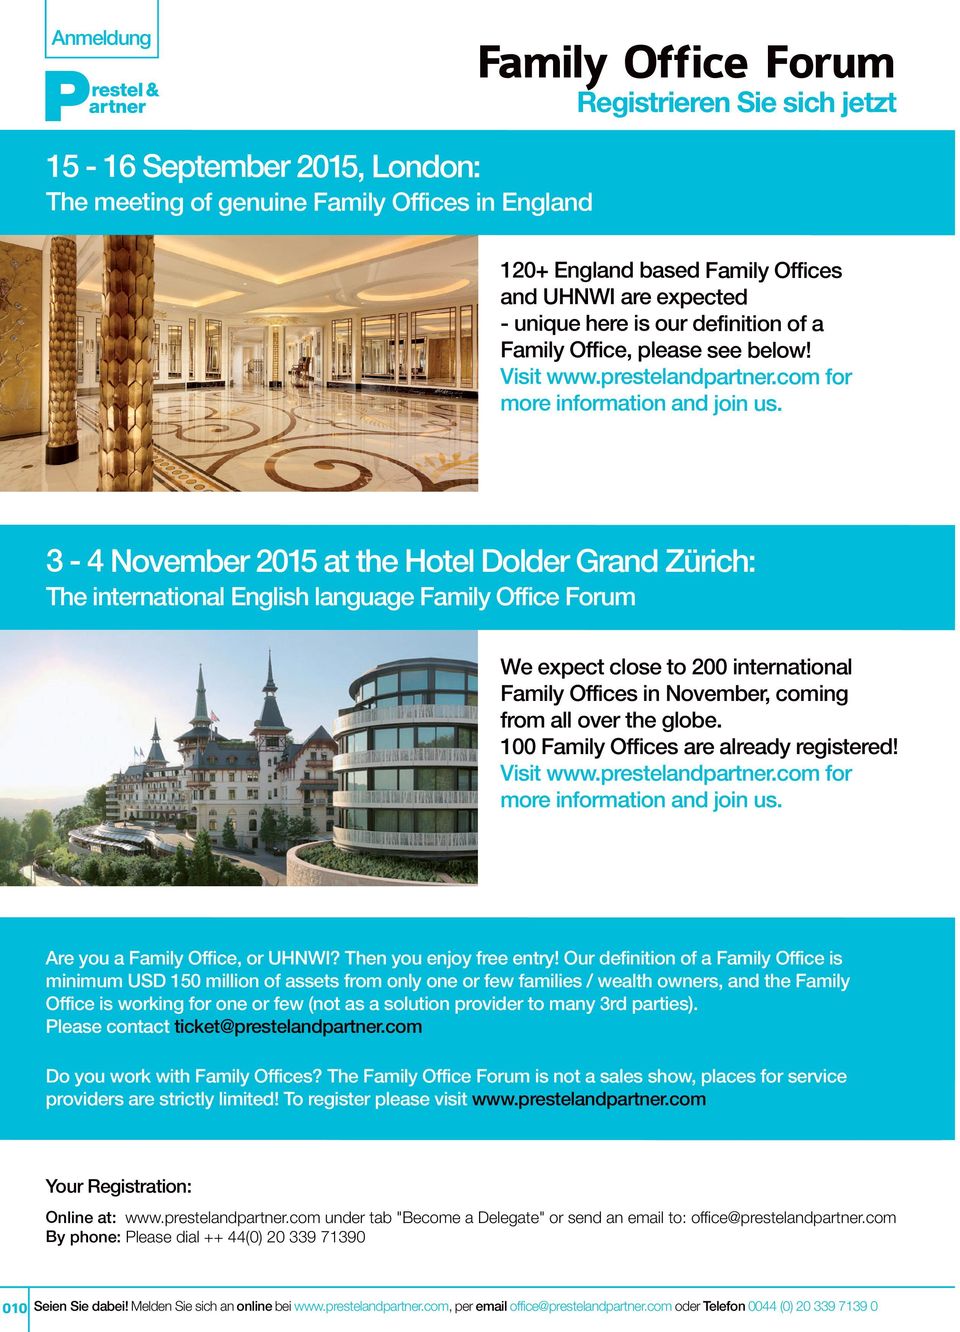 3-4 November 2015 at the Hotel Dolder Grand Zürich: The international English language We expect close to 200 international Family Offices in November, coming from all over the globe.